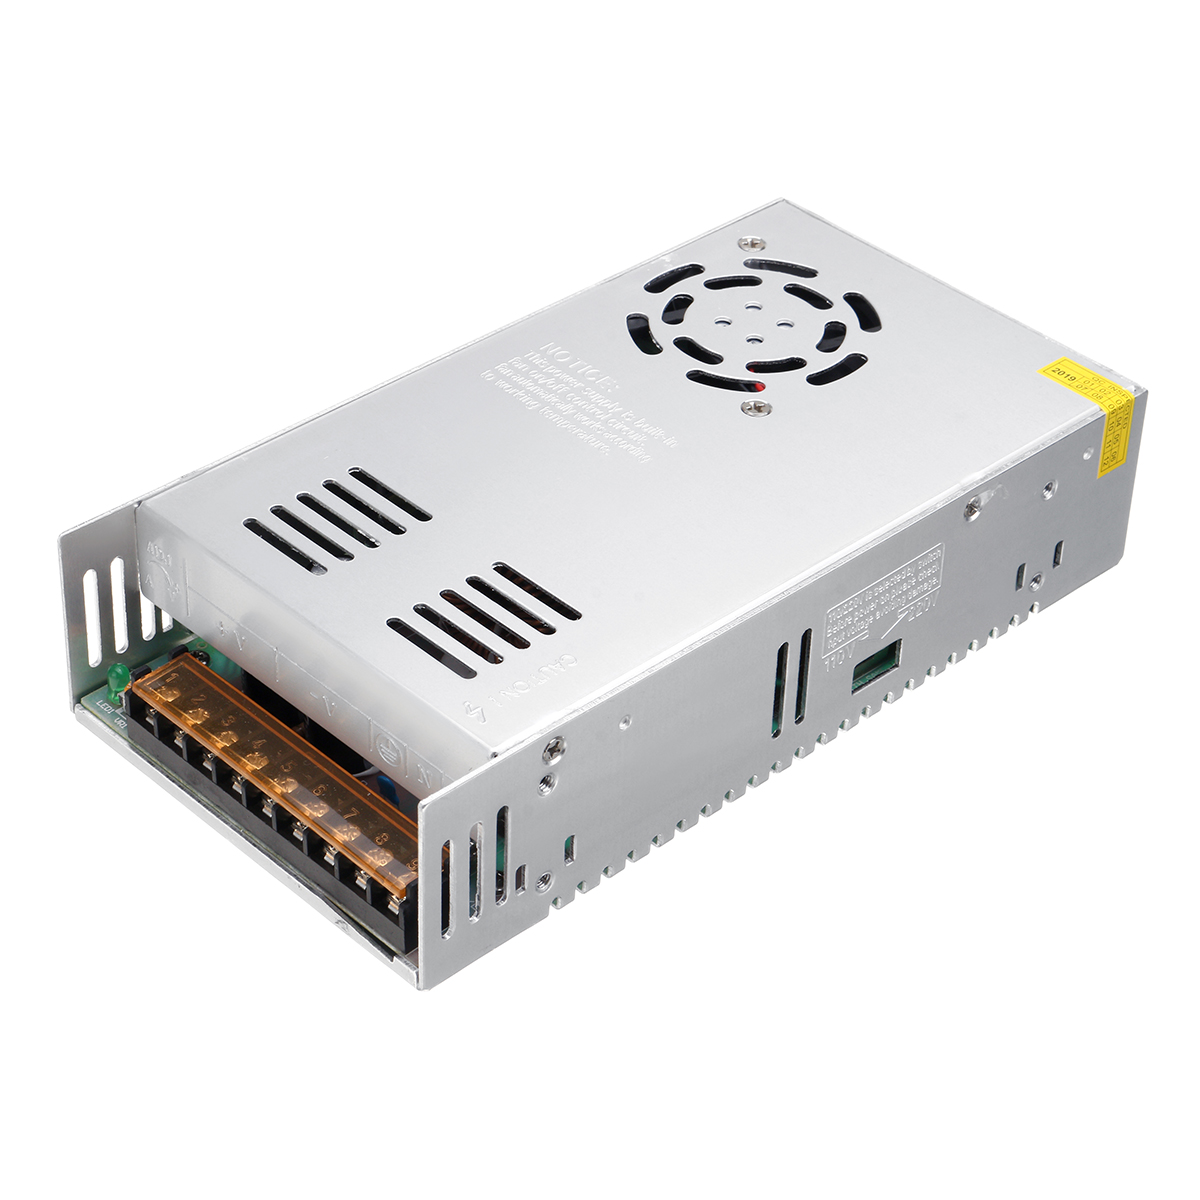 

500W Switching Power Supply AC 110V-240V Regulated To DC 48V 10.4A LED Power Supply Driver Adapter Security Monitoring P